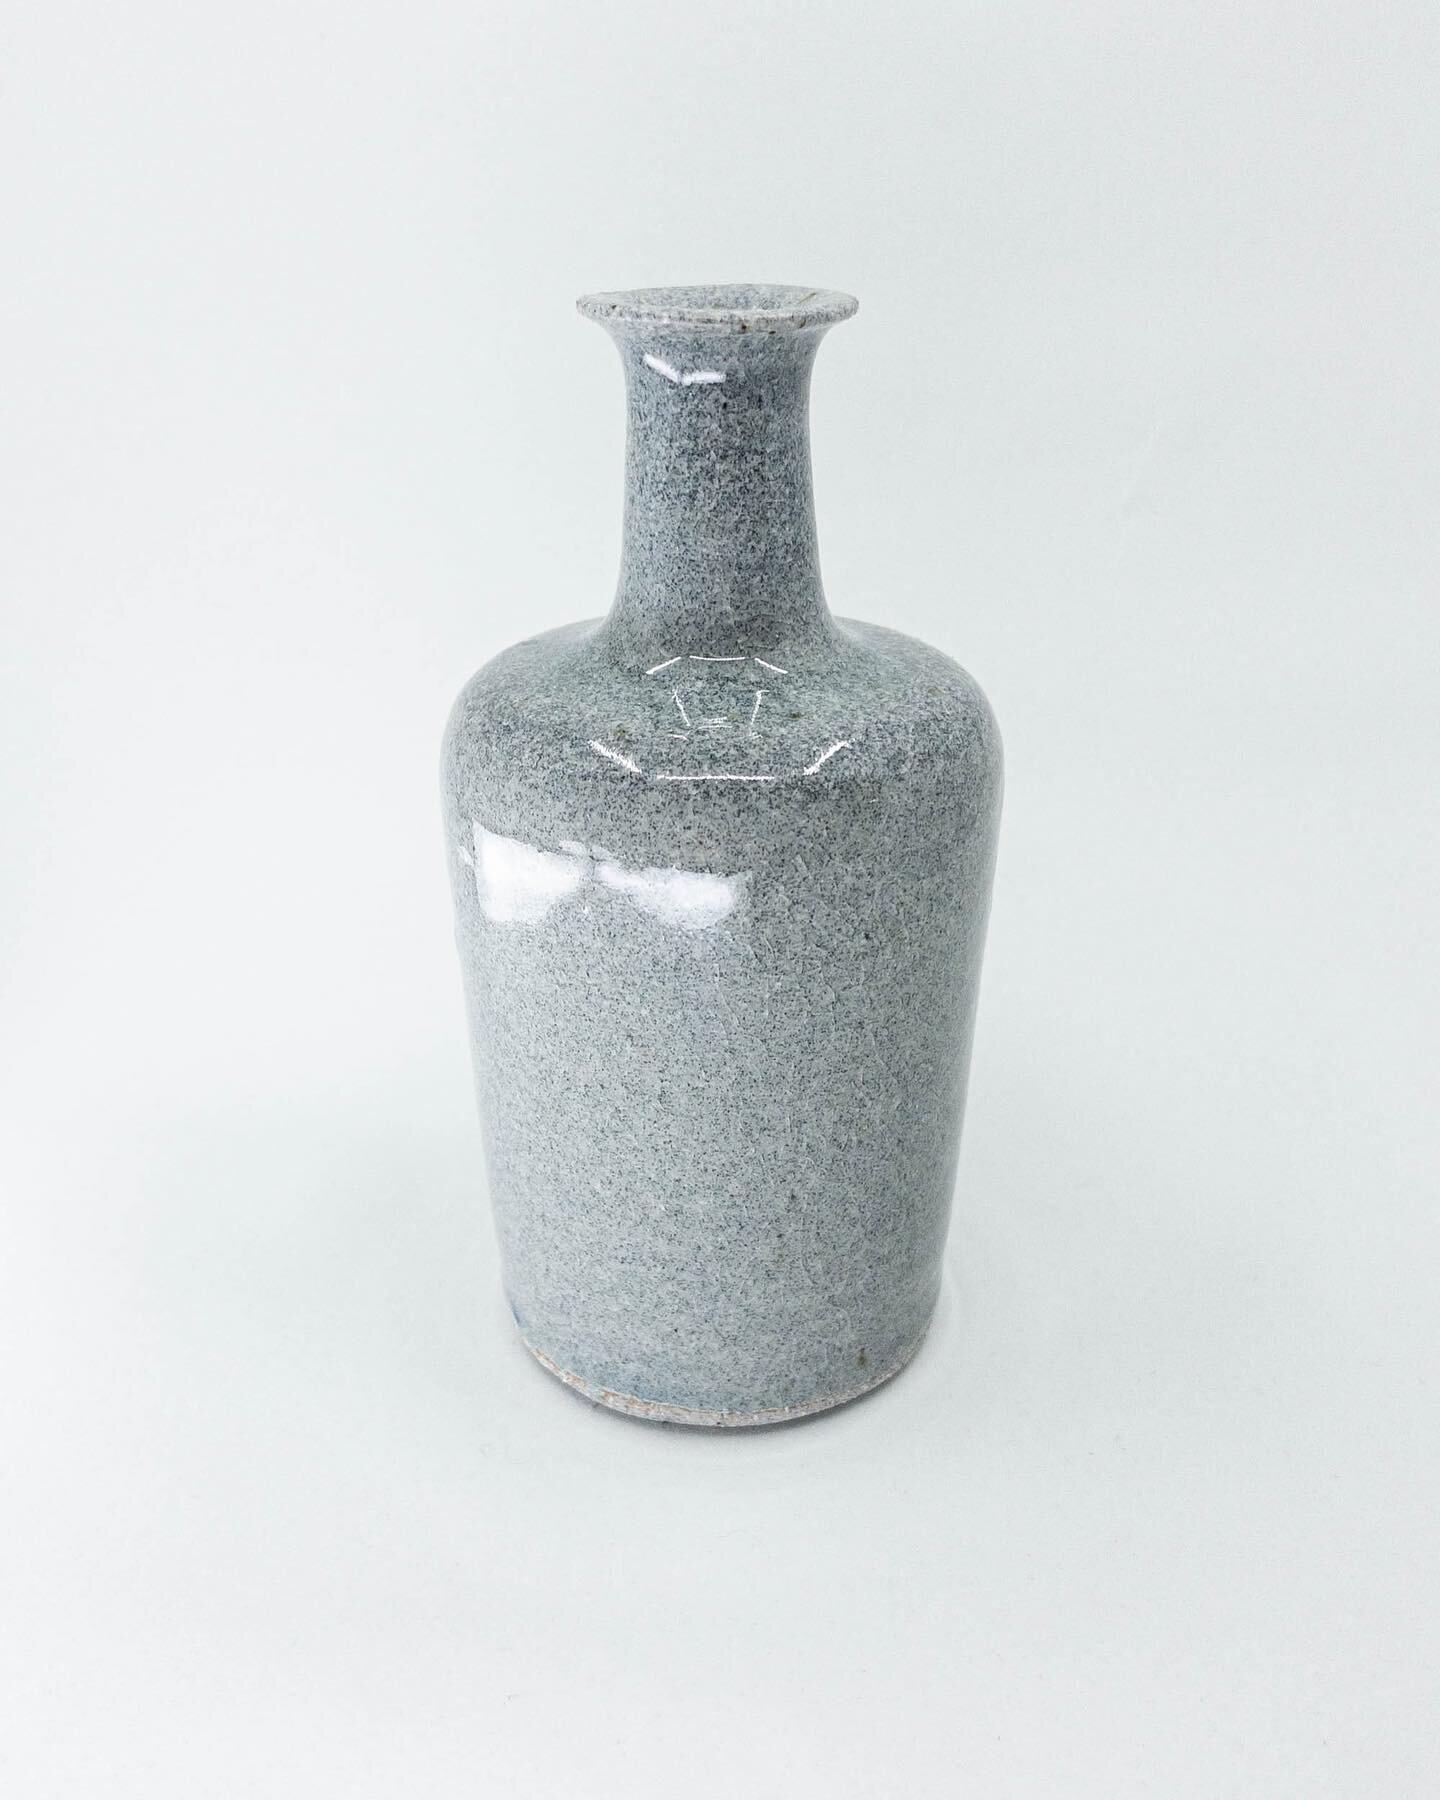 Grey bottle. Made from &ldquo;granite&rdquo; stoneware with a clear glaze, reduction fired to cone 10. Probably the most bottle-ey bottle I&rsquo;ve bottled. I love this clay+glaze combo and the way it looks like polished concrete when finished. 
.
.